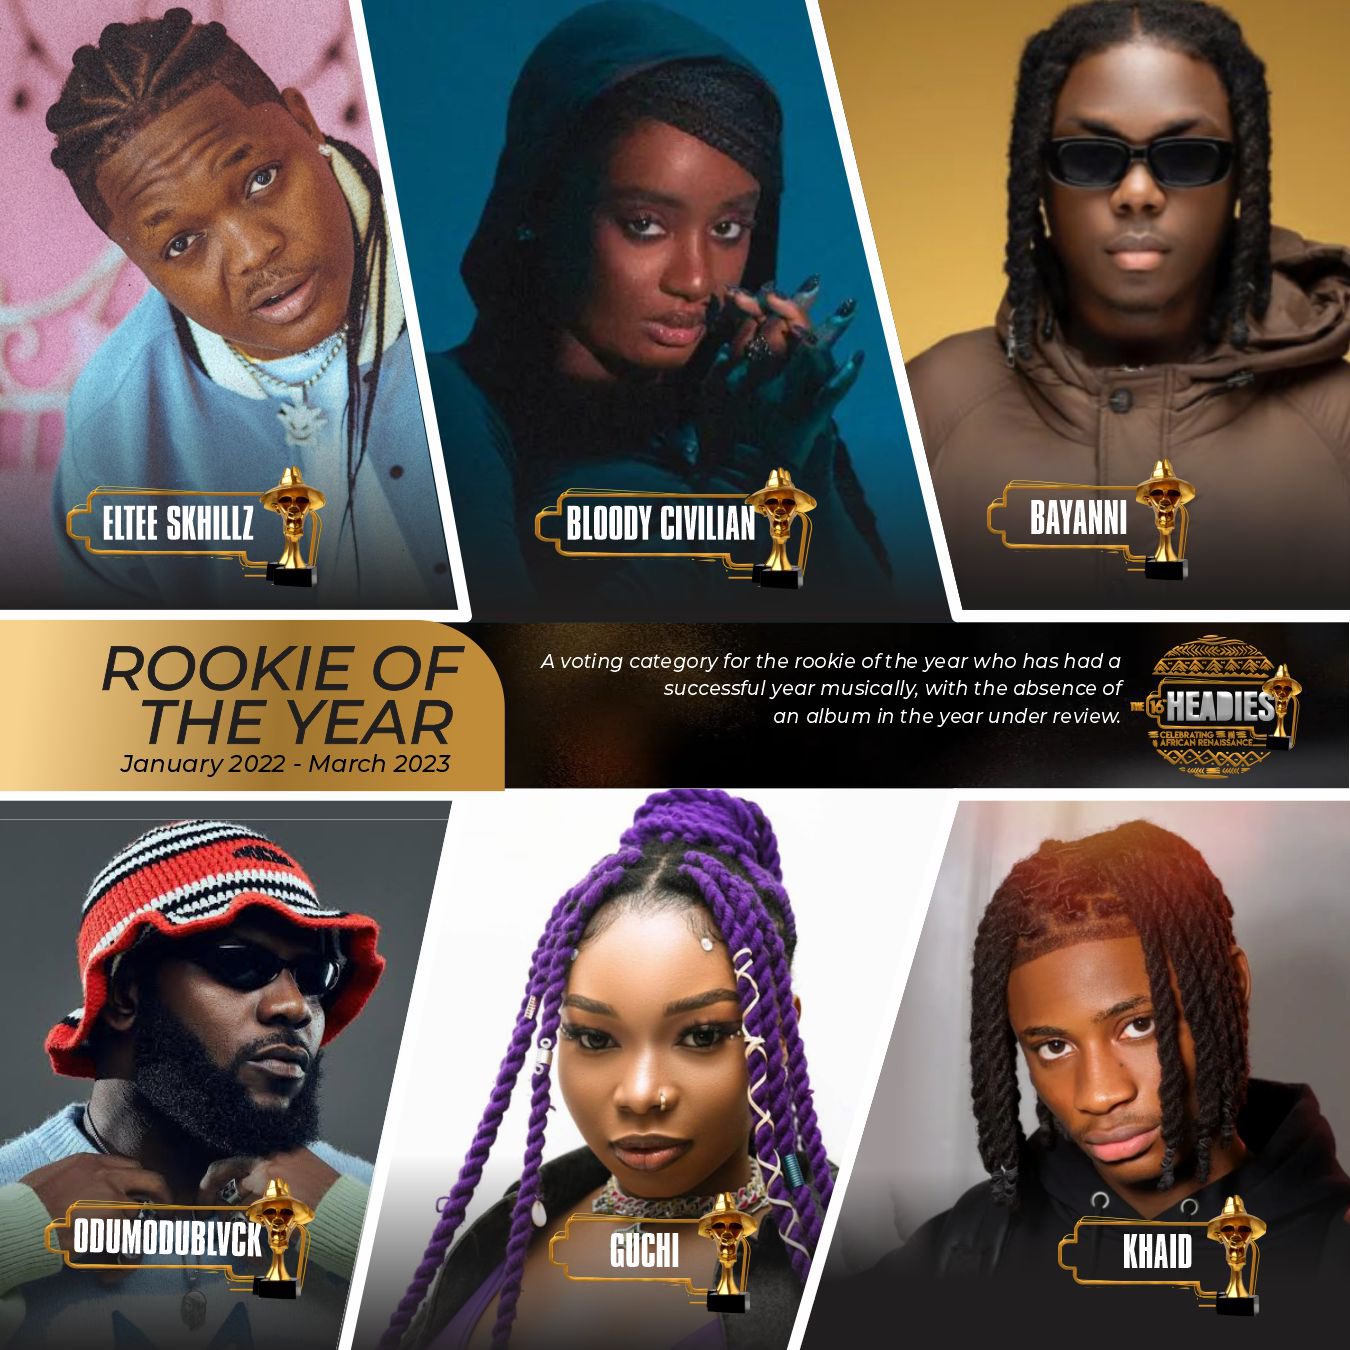 Headies Awards Guchi, Others Nominated for Rookie Of The Year